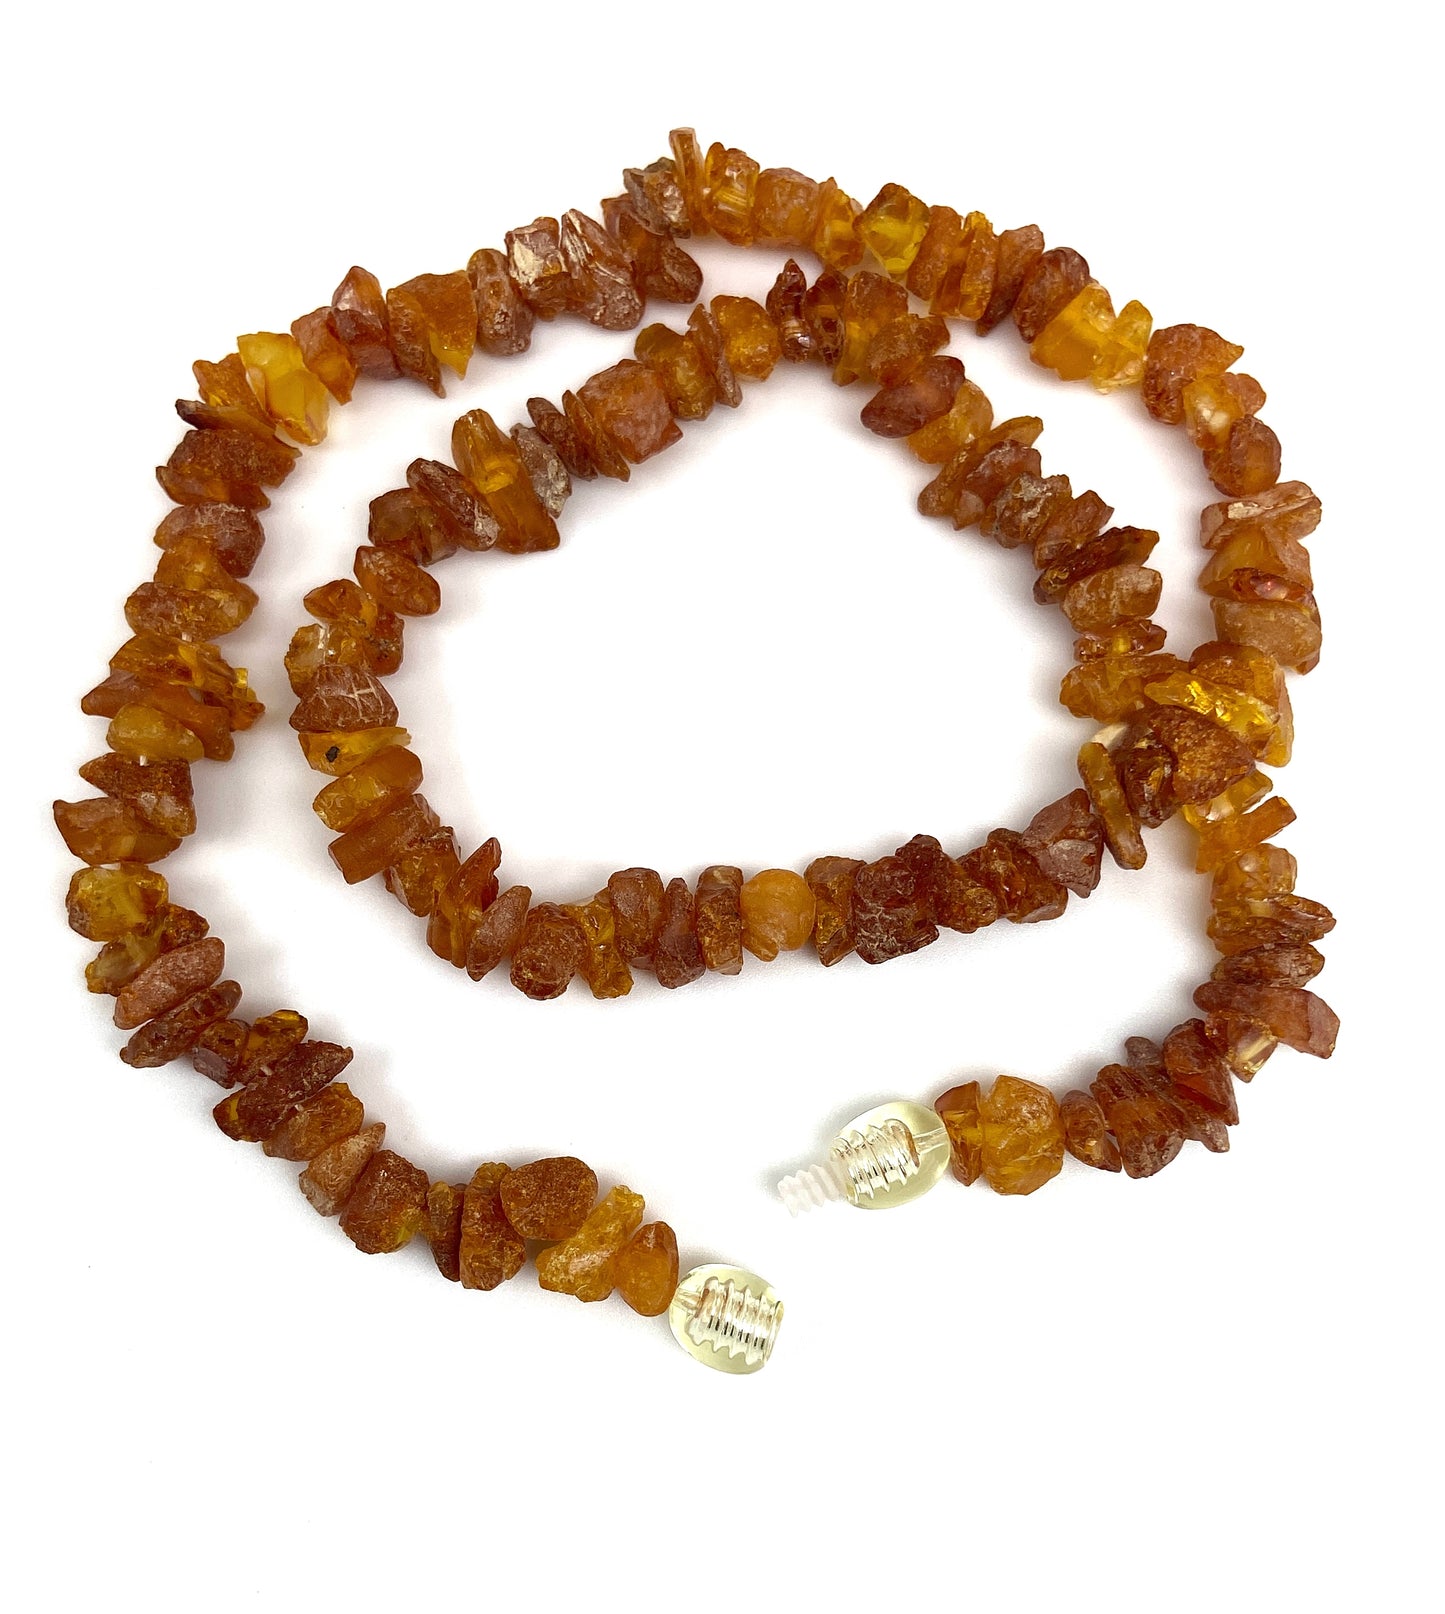 Healing necklace made of raw amber